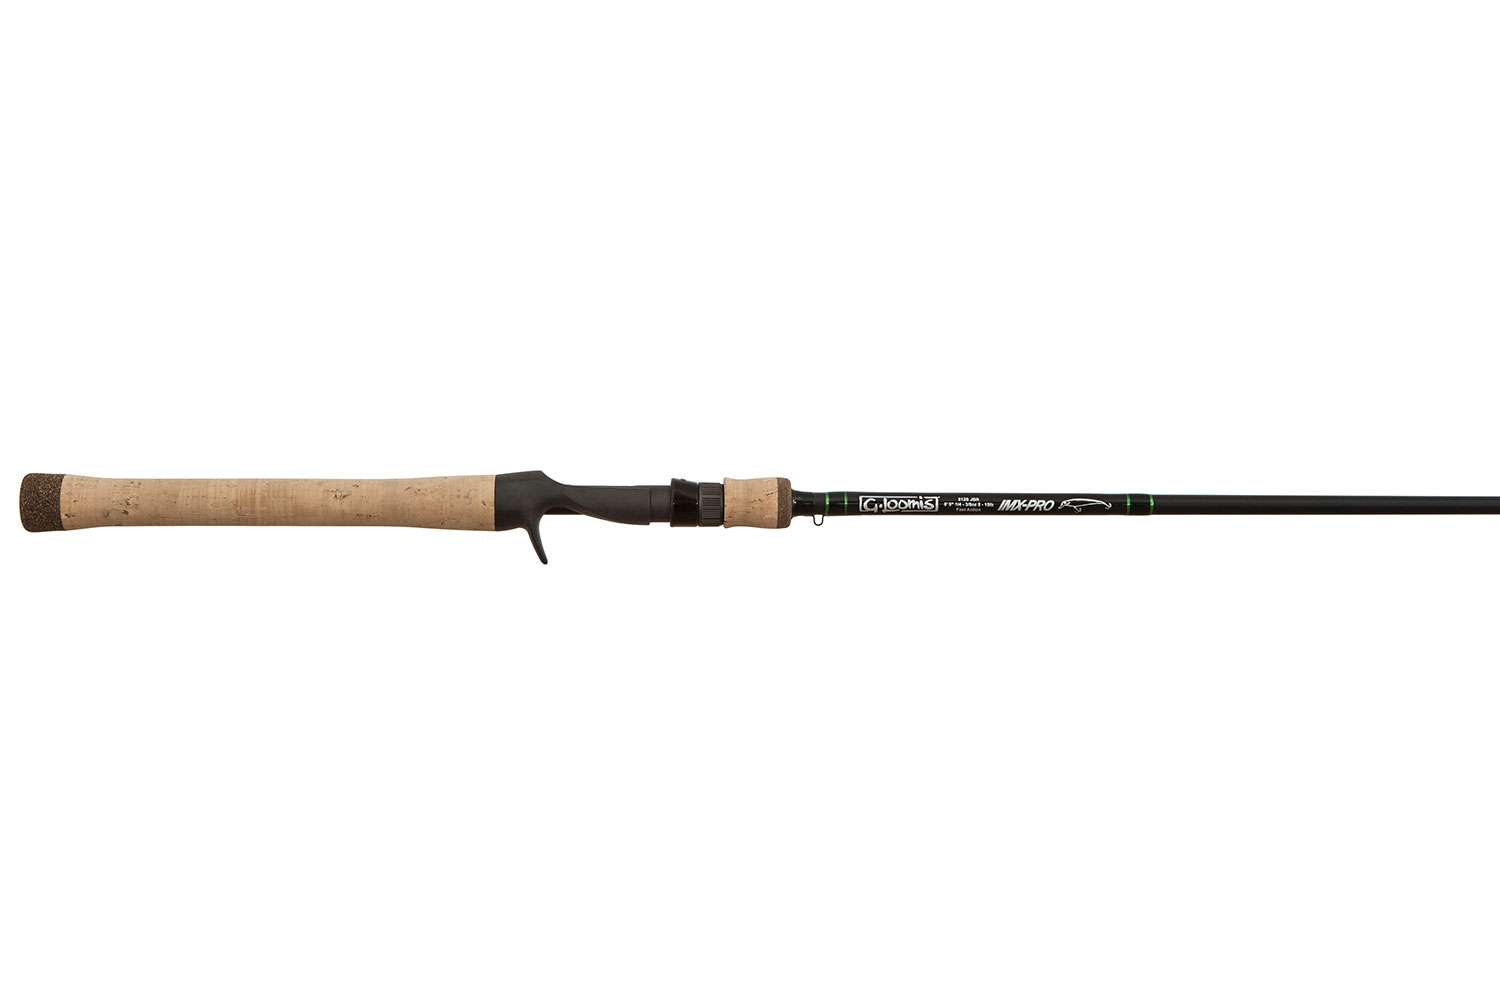 <p><b>G. Loomis IMX-Pro, $325-$360</b></p> Providing the right flex and power, along with the right lengths and the optimum components, G. Loomis introduces its new IMX-PRO bass rod series designed for fishing bottom contact baits. The main goal behind the 24 models â including jig and worm, Carolina rig, flip/punch, dropshot and shaky head rods, is to provide serious tournament anglers with a broad offering of high performance, technique-specific fishing tools.</p>	 In redesigning its IMX rods, âweâve taken advantage of improvements in both our manufacturing processes and materials,â said G. Loomisâ Bruce Holt, an avid angler who knows more about G. Loomis bass rods than just about anyone. âOur rod engineers â led by David Brinkerhoff, used G. Loomisâ proprietary Multi-Taper Technology to design the IMX-PRO blanks to fish specific techniques, using strategic scrim placement to create very specific tapers to enhance the action for each of those techniques.â Holt notes the blanks are up to 18-percent lighter than comparable E6X rod blanks, and anglers will quickly sense a noticeable step above performance improvement over previous IMX rods. <br> <a href=